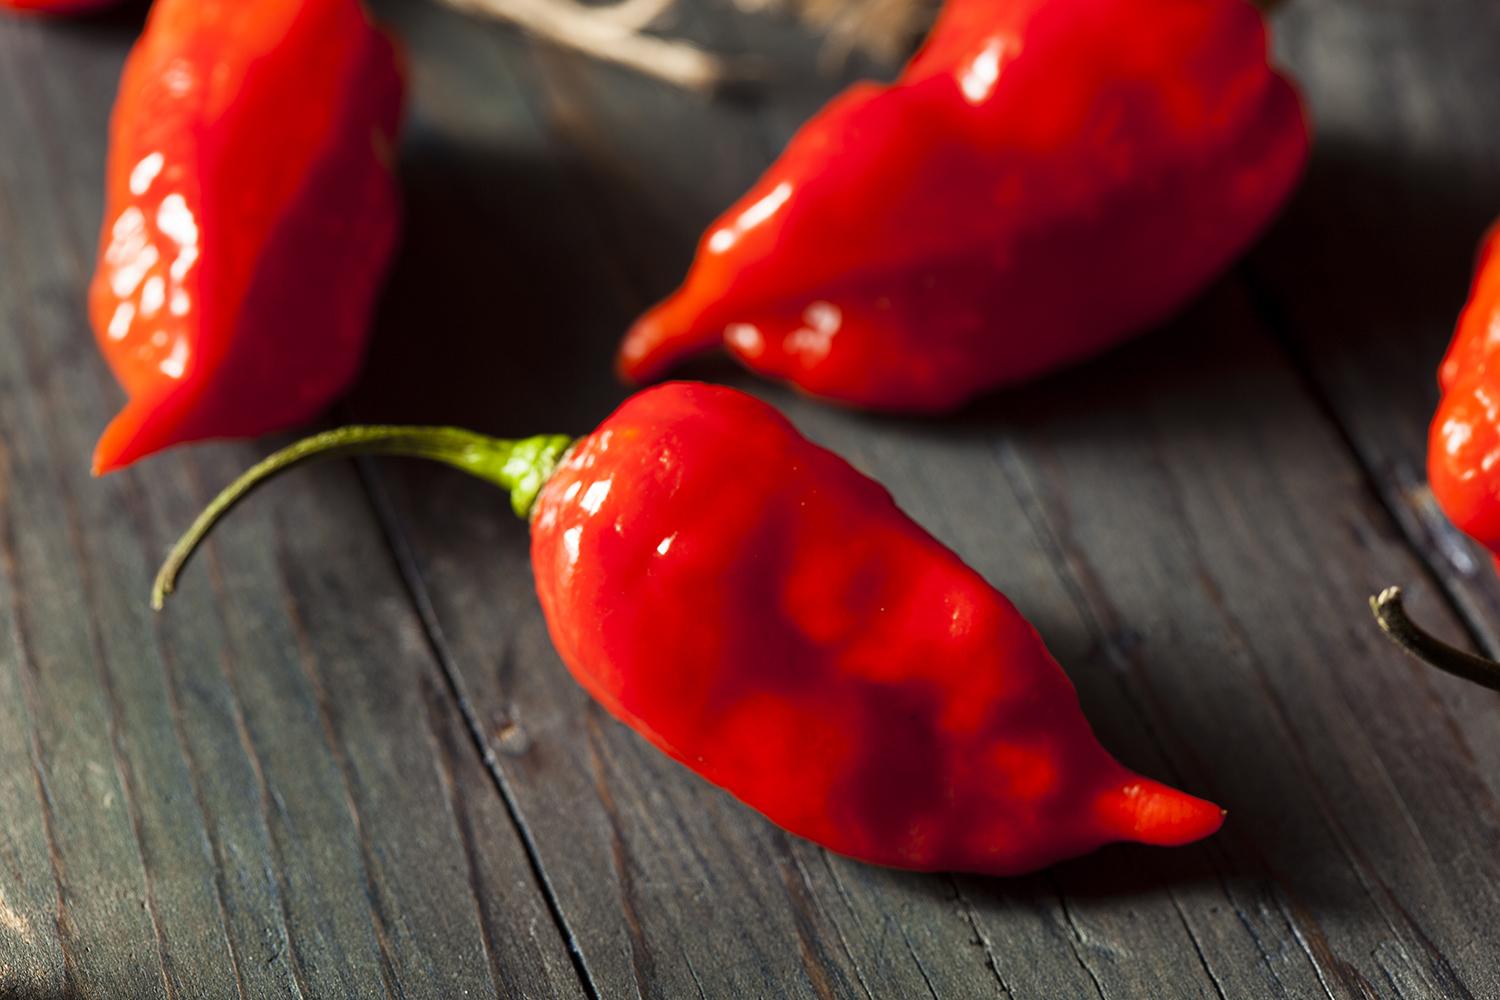 The 5 hottest peppers known to man